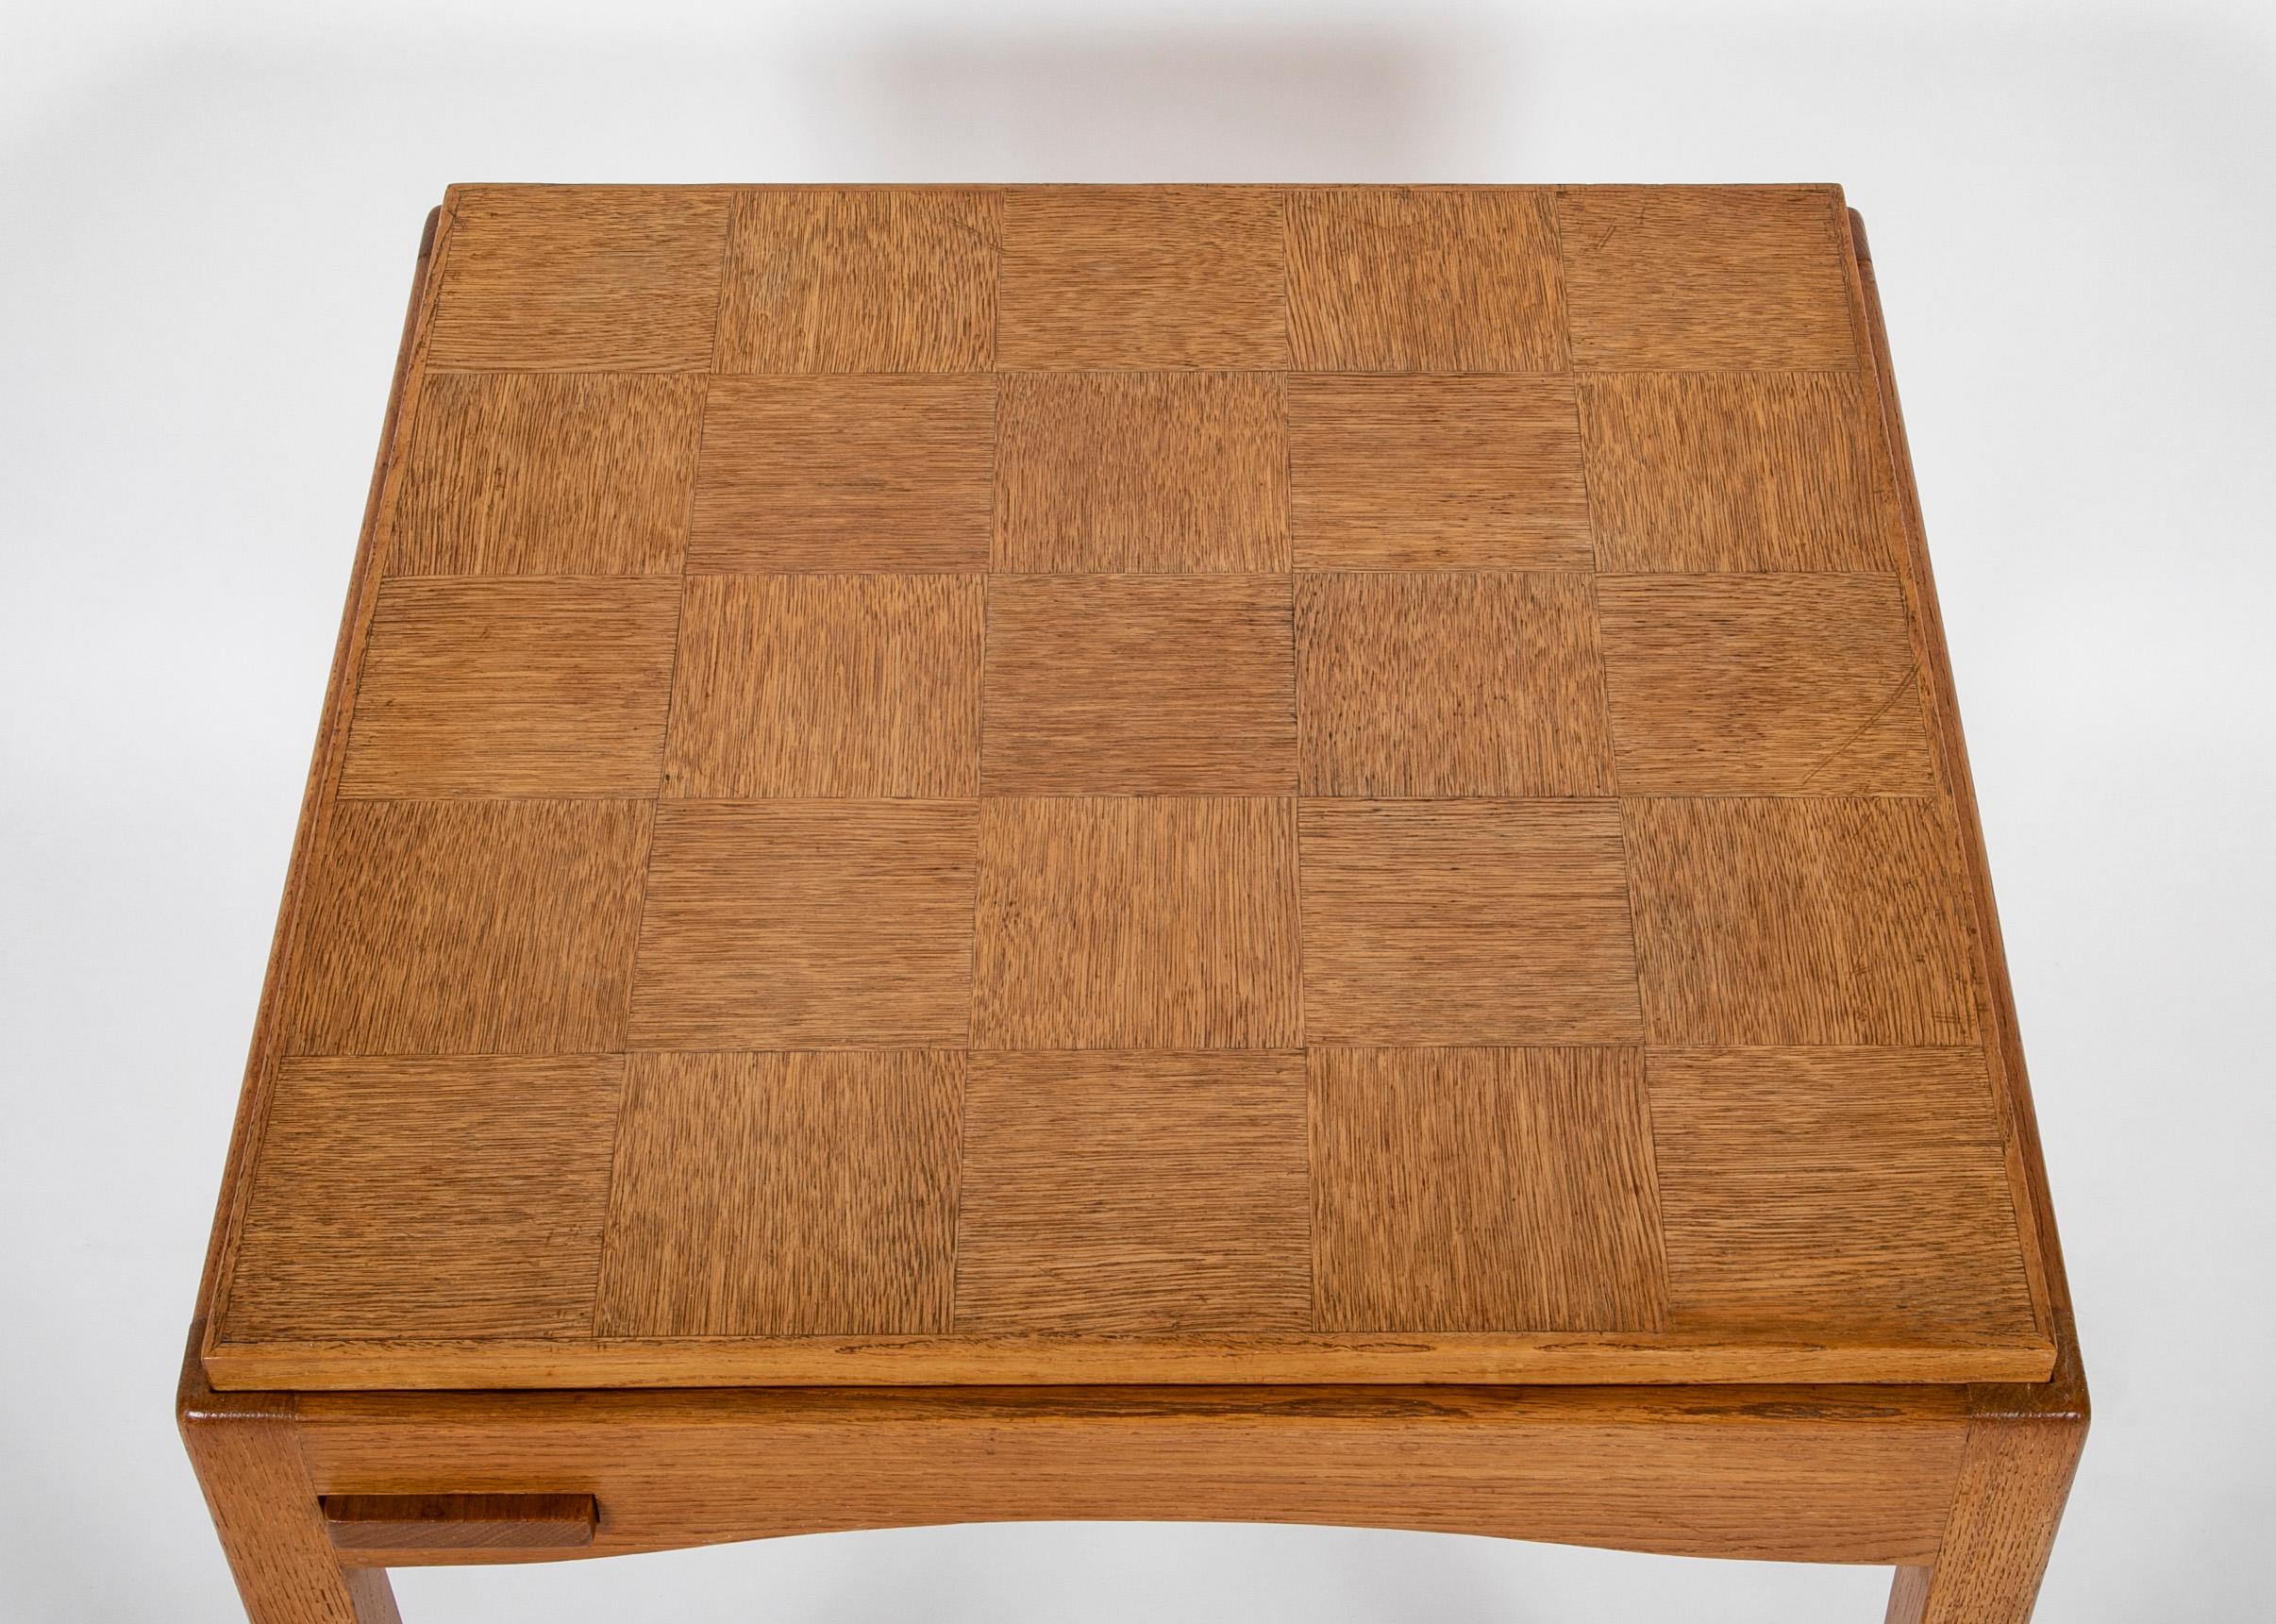 Anodized Oak Games Table Designed by Victor Courtray